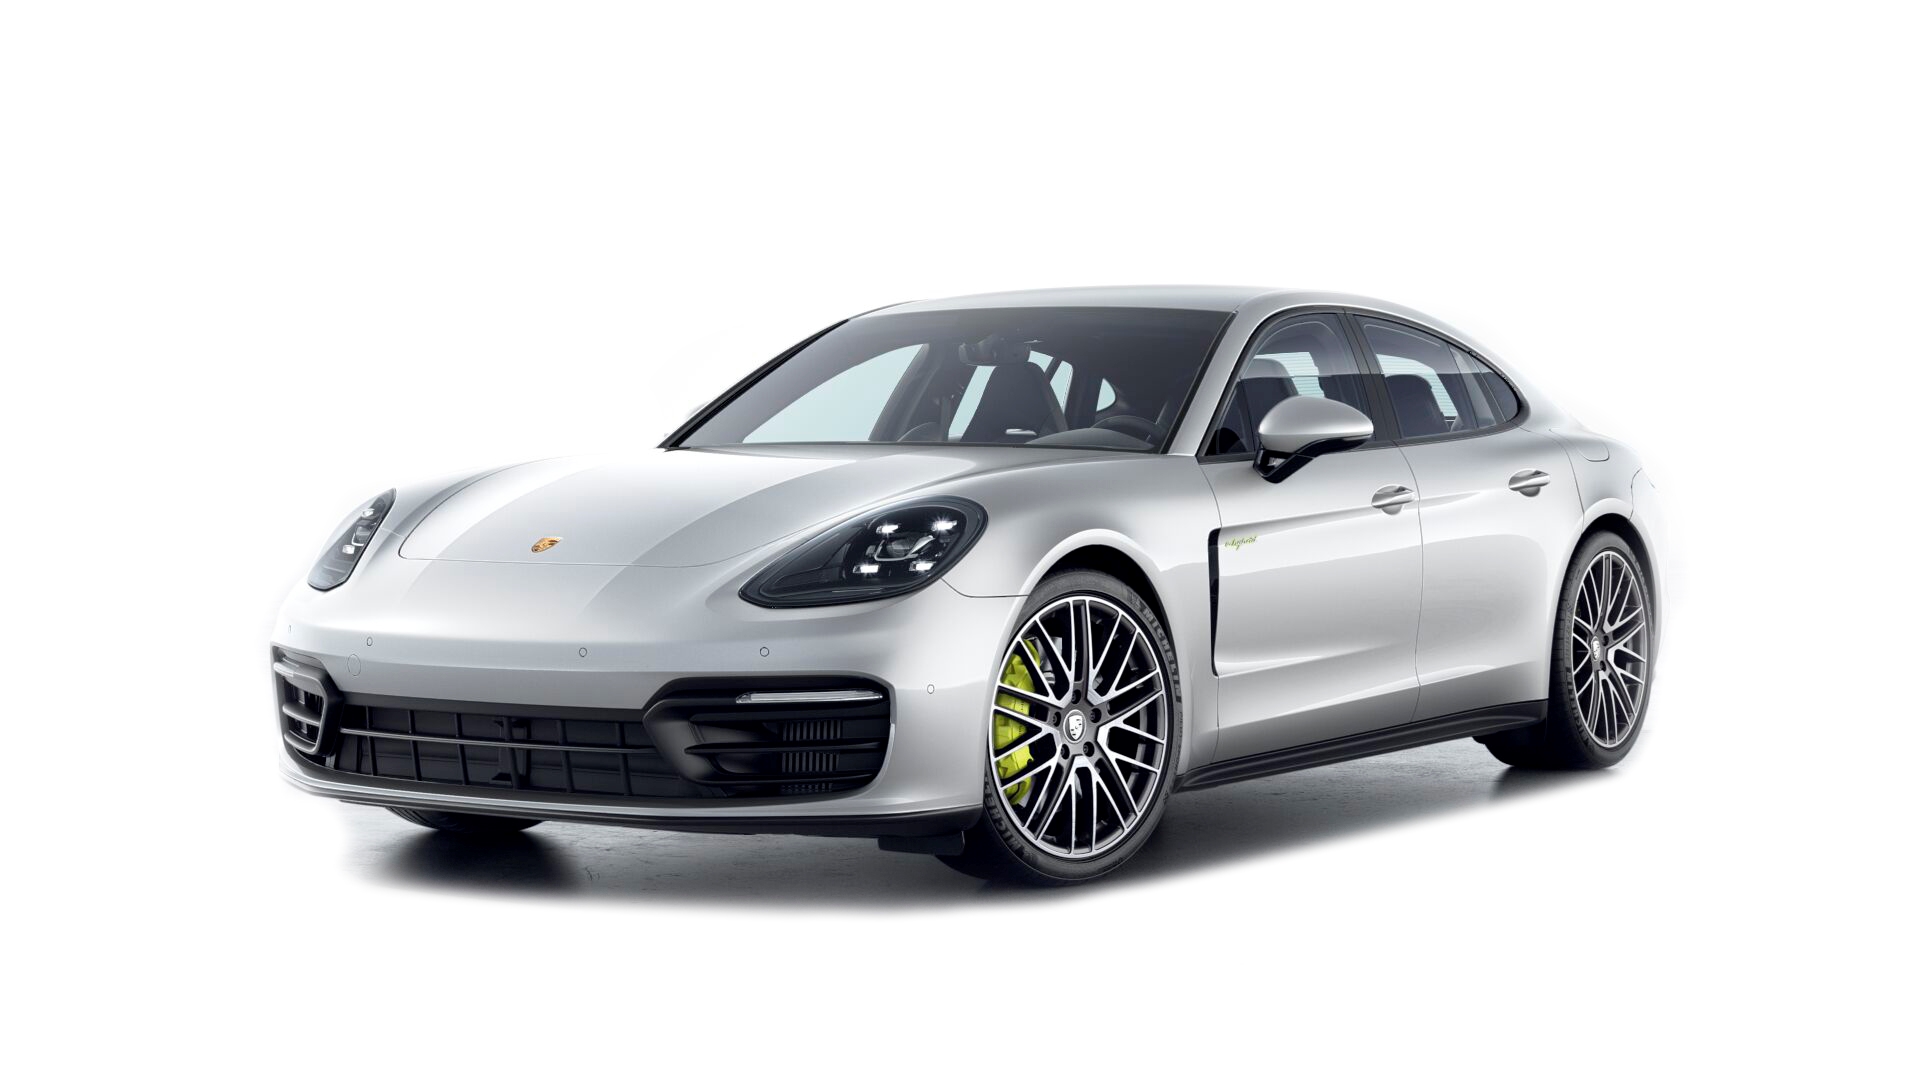 2022 Porsche Panamera Turbo S E-Hybrid Full Specs, Features and Price |  CarBuzz